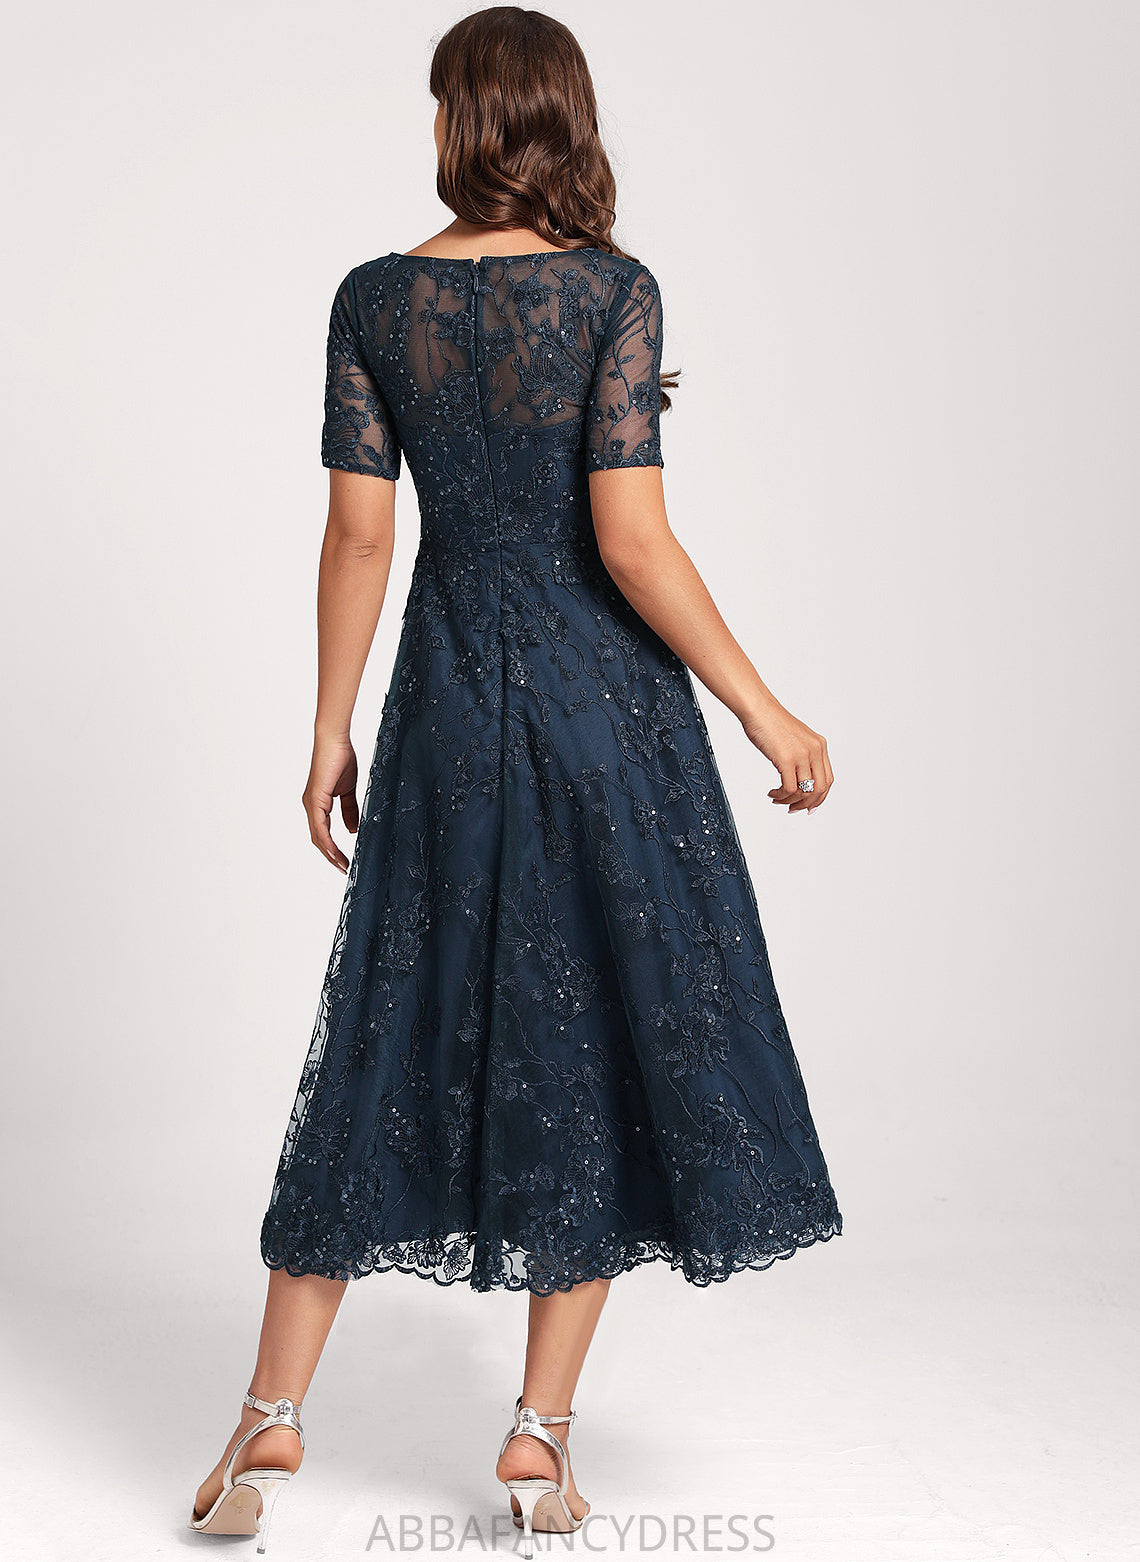 Sequins Nita Lace A-Line Dress Cocktail Scoop Tulle With Neck Club Dresses Asymmetrical